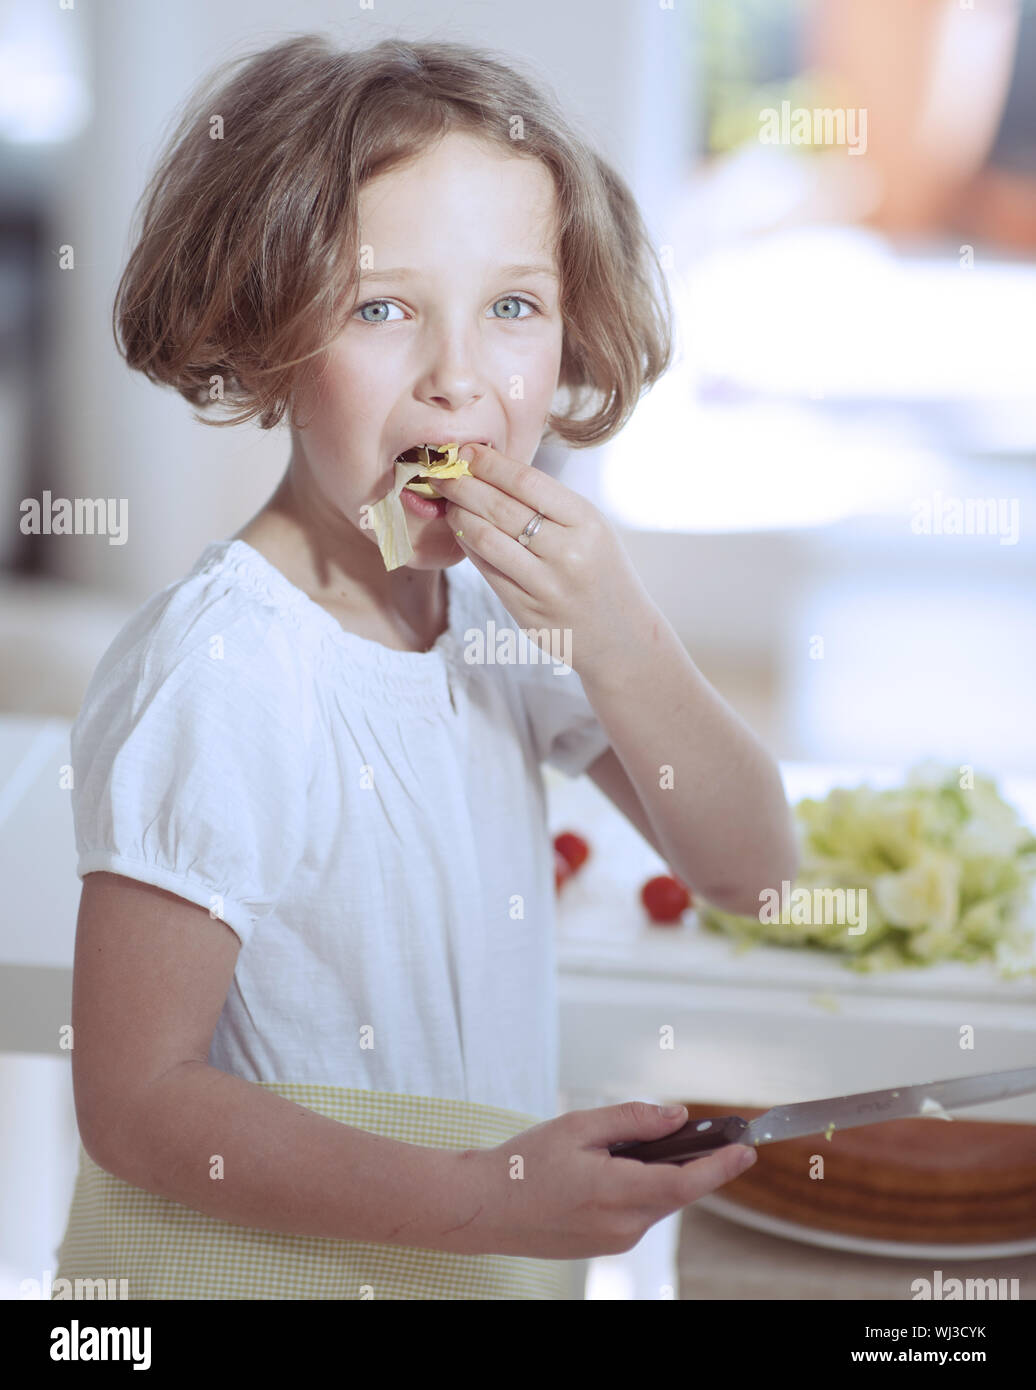 Young girl eating salad whilst holding knife in kitchen Stock Photo